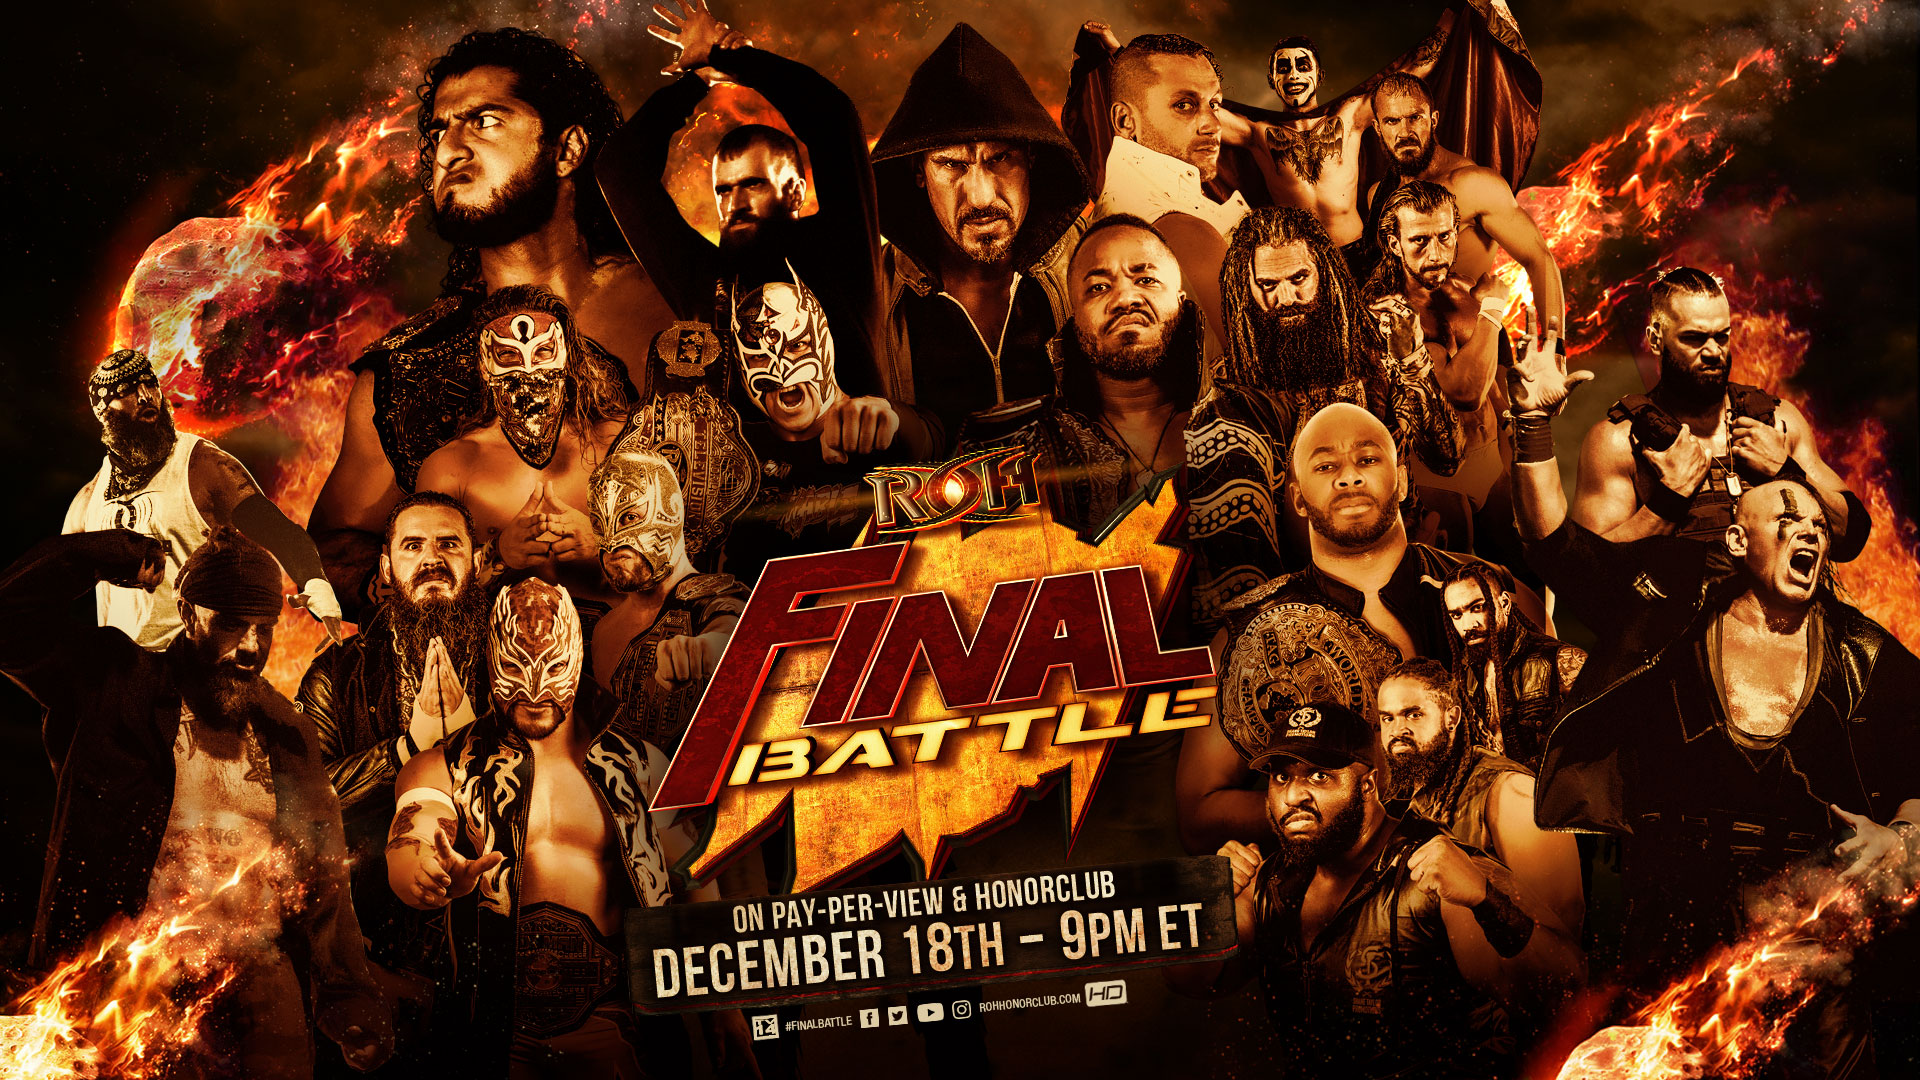 ROH Releases New Video Trailer For Final Battle 2020 Pay Per View